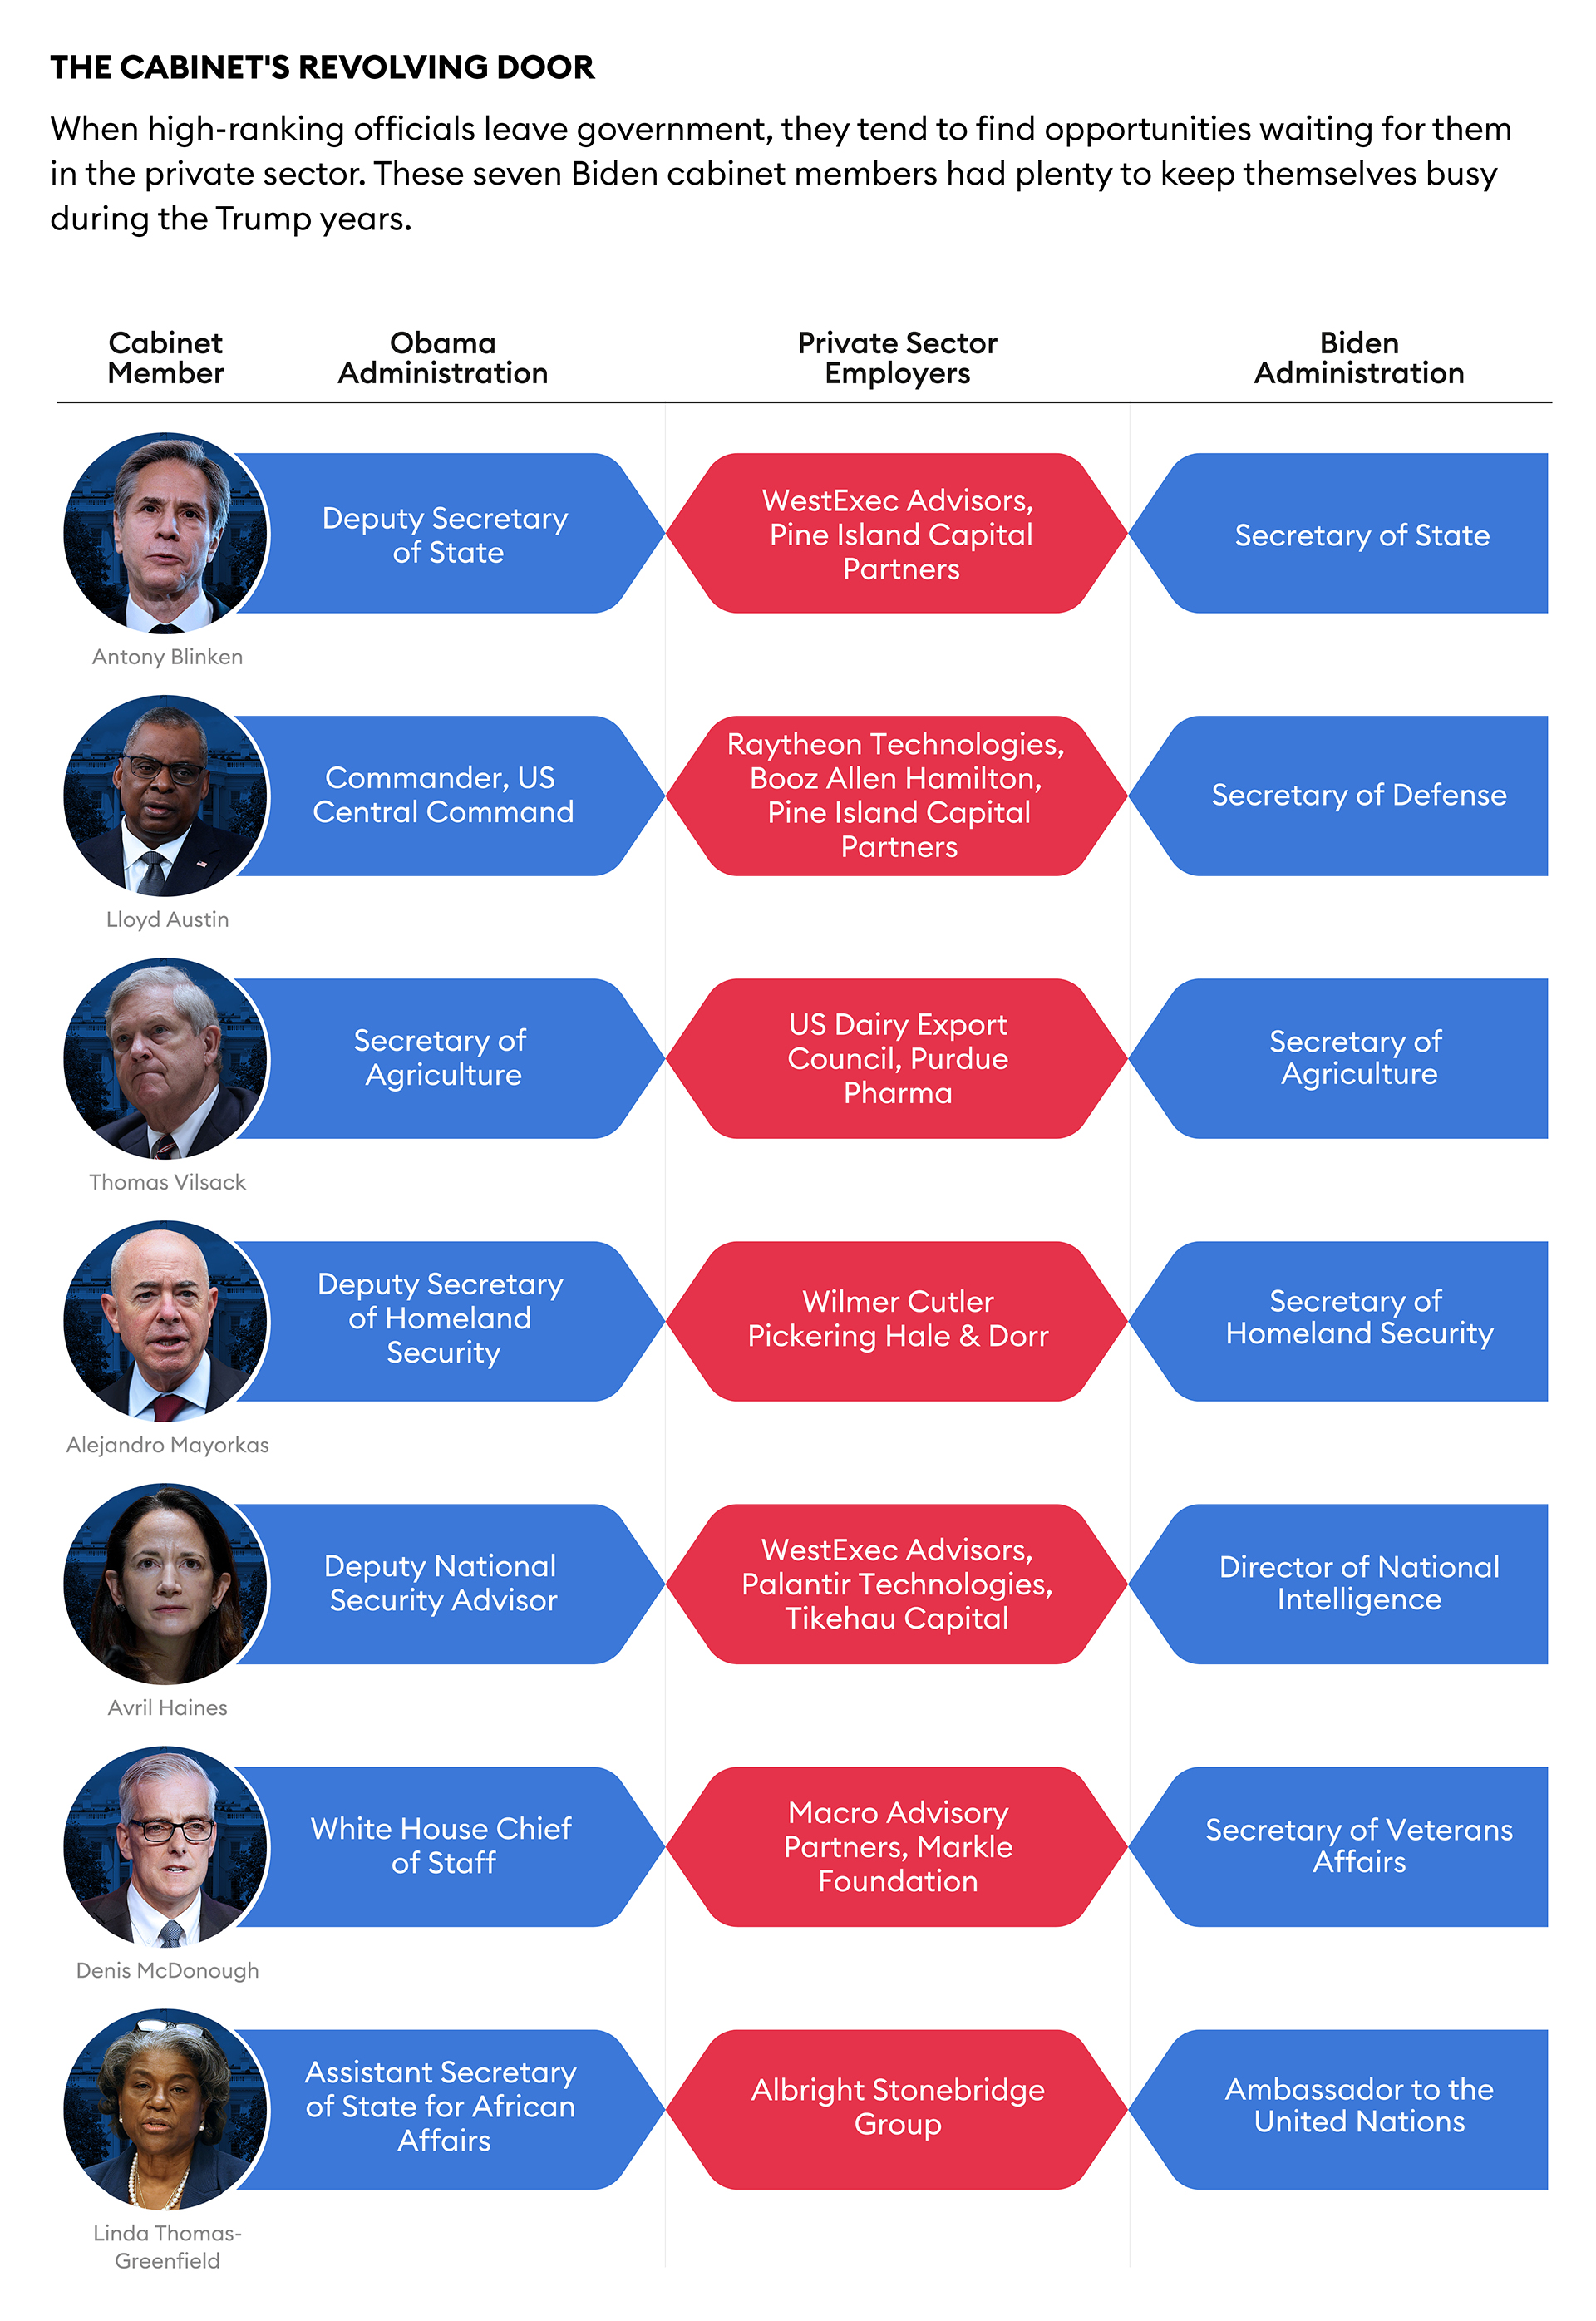 When high-ranking officials leave government, they tend to find opportunities waiting for them in the private sector. These seven Biden cabinet members had plenty to keep themselves busy during the Trump years.